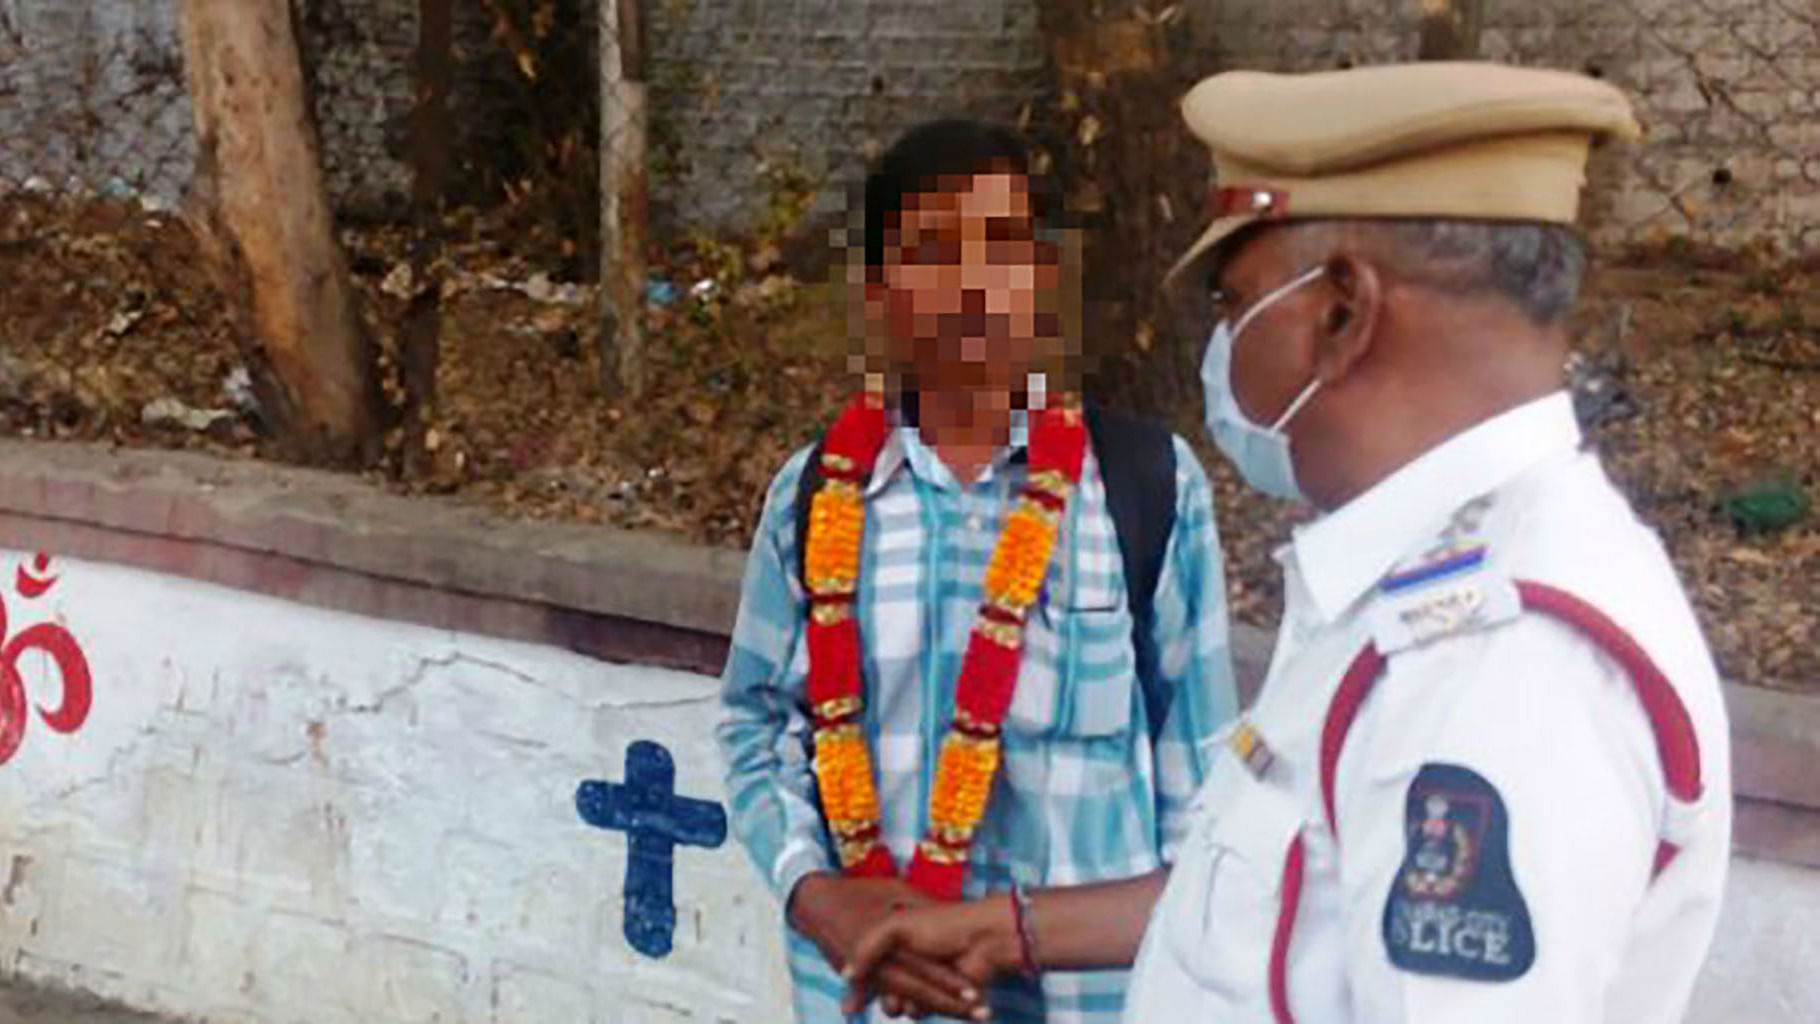 This man was garlanded after he was caught urinating. (Photo: The News Minute)